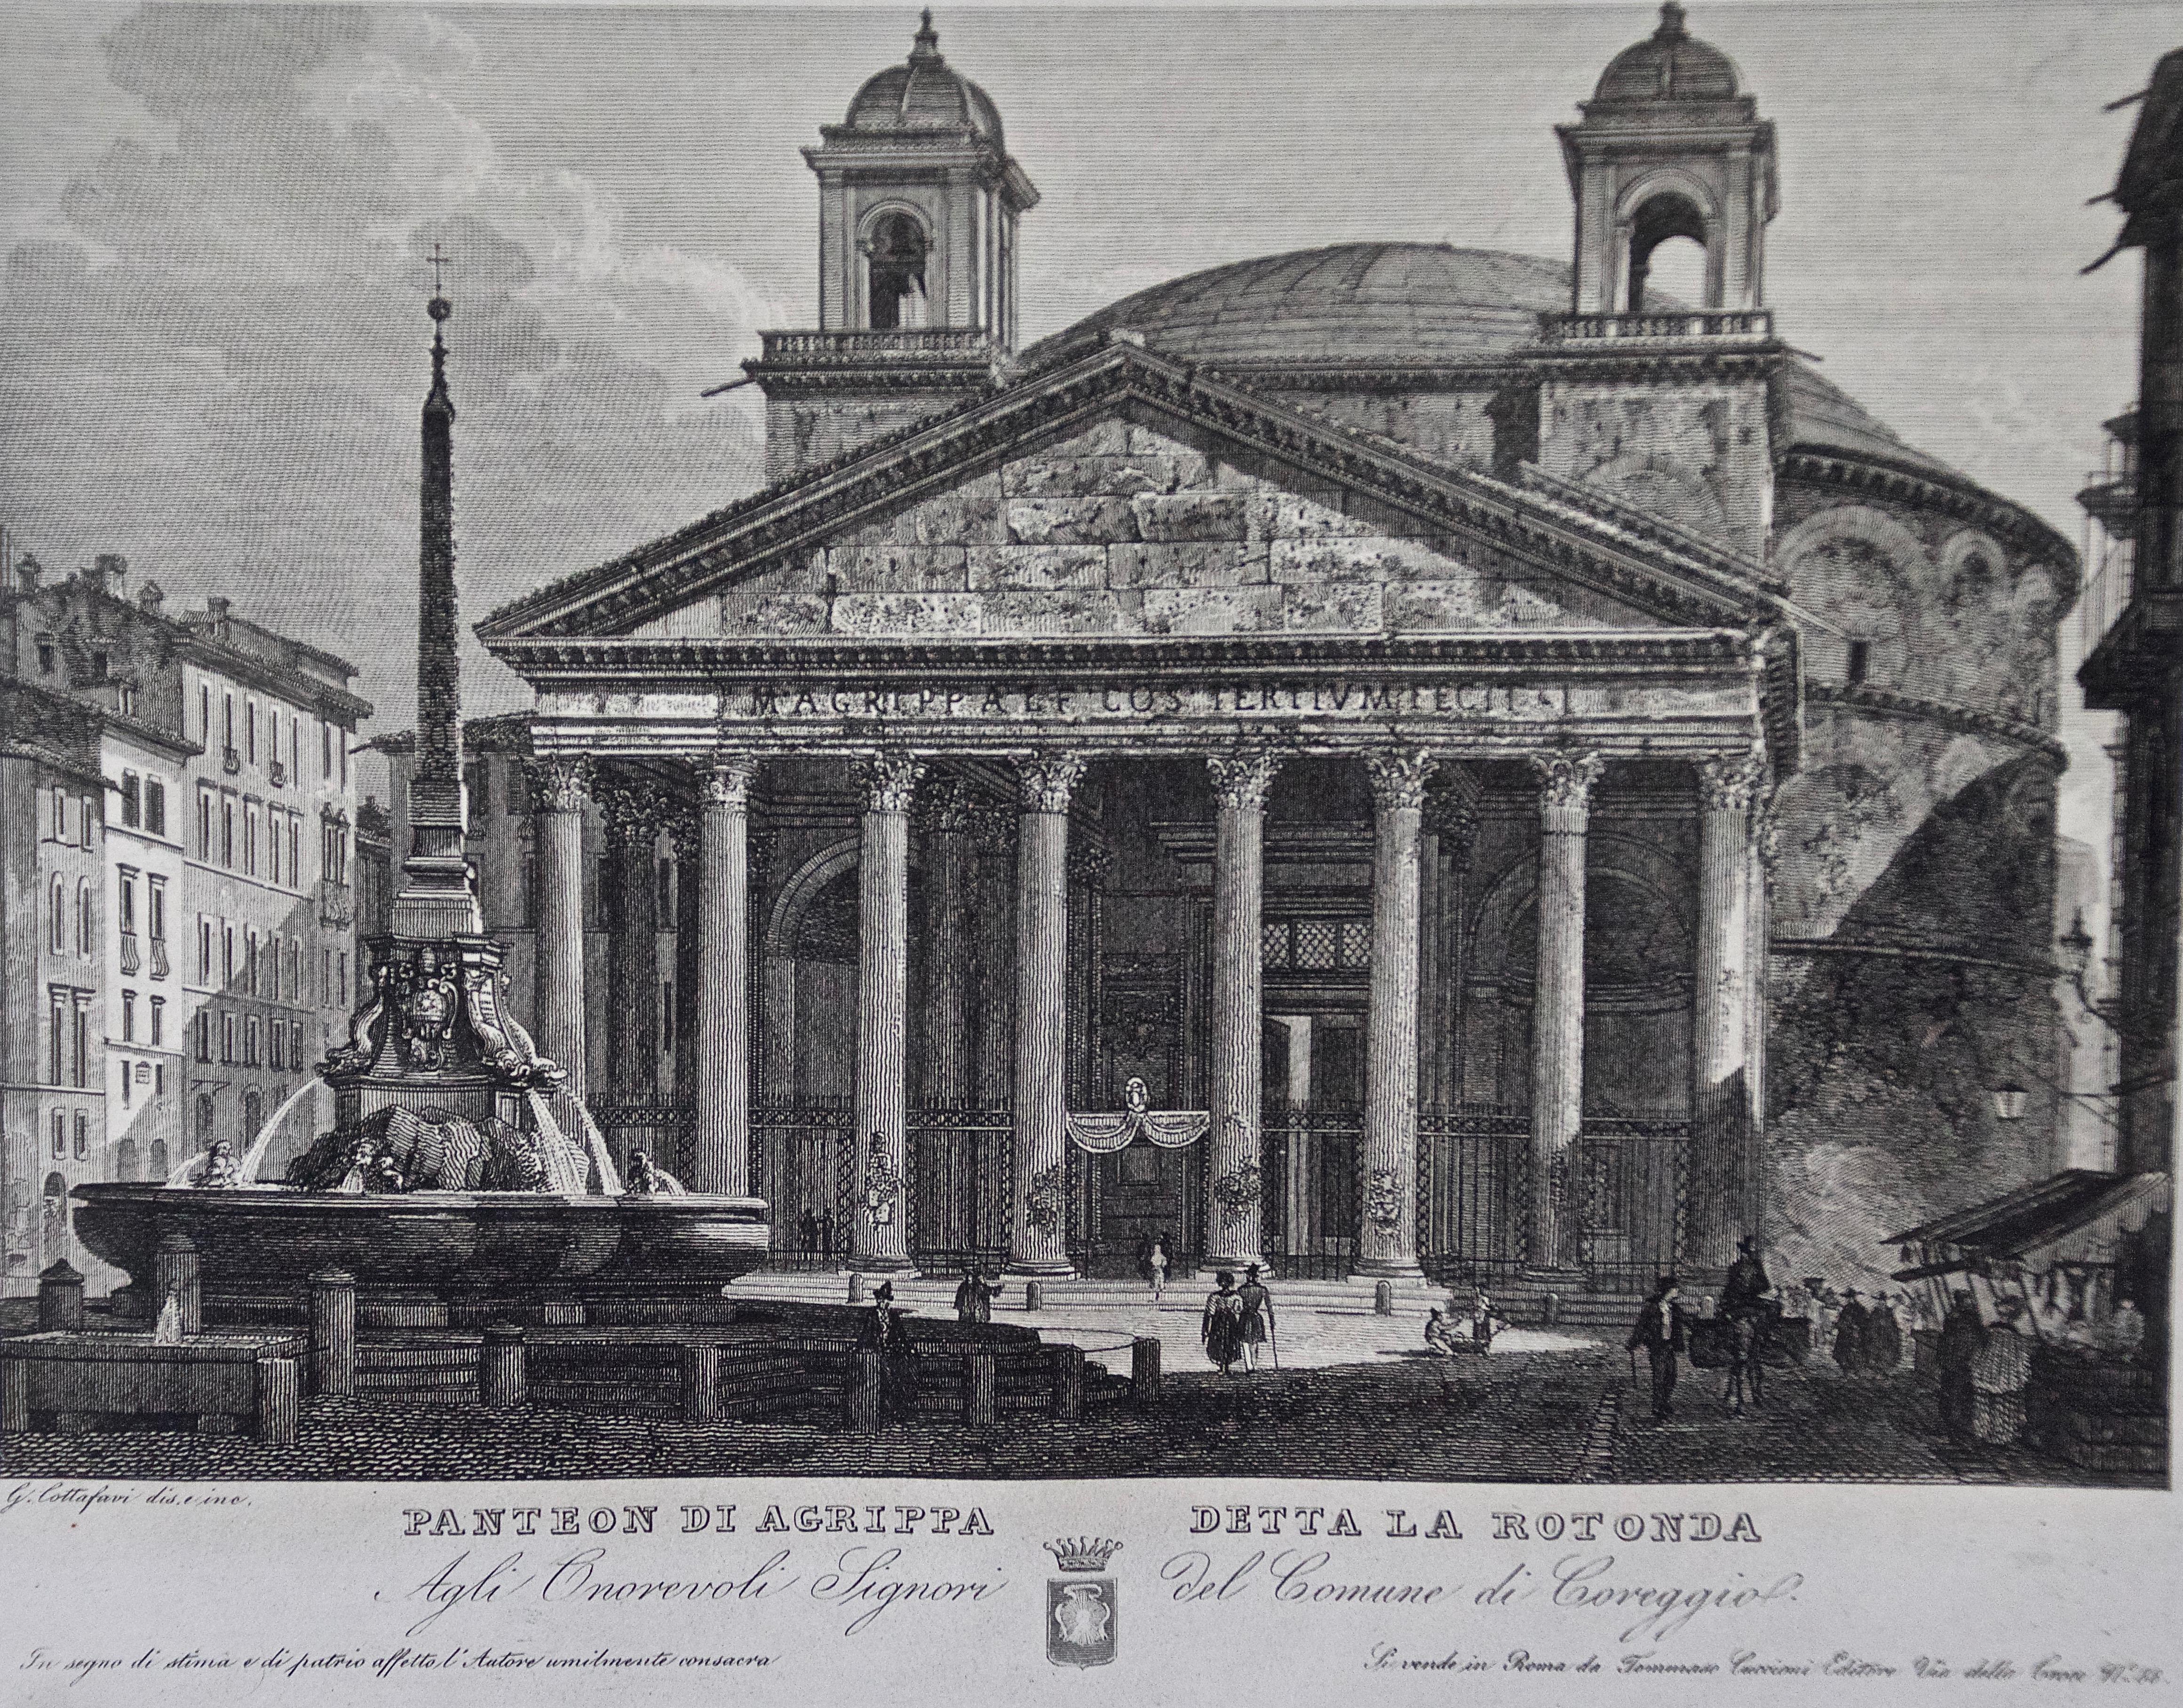 The Pantheon in Rome: A 19th Century Etching by Cottafavi - Print by Gaetano Cottafavi